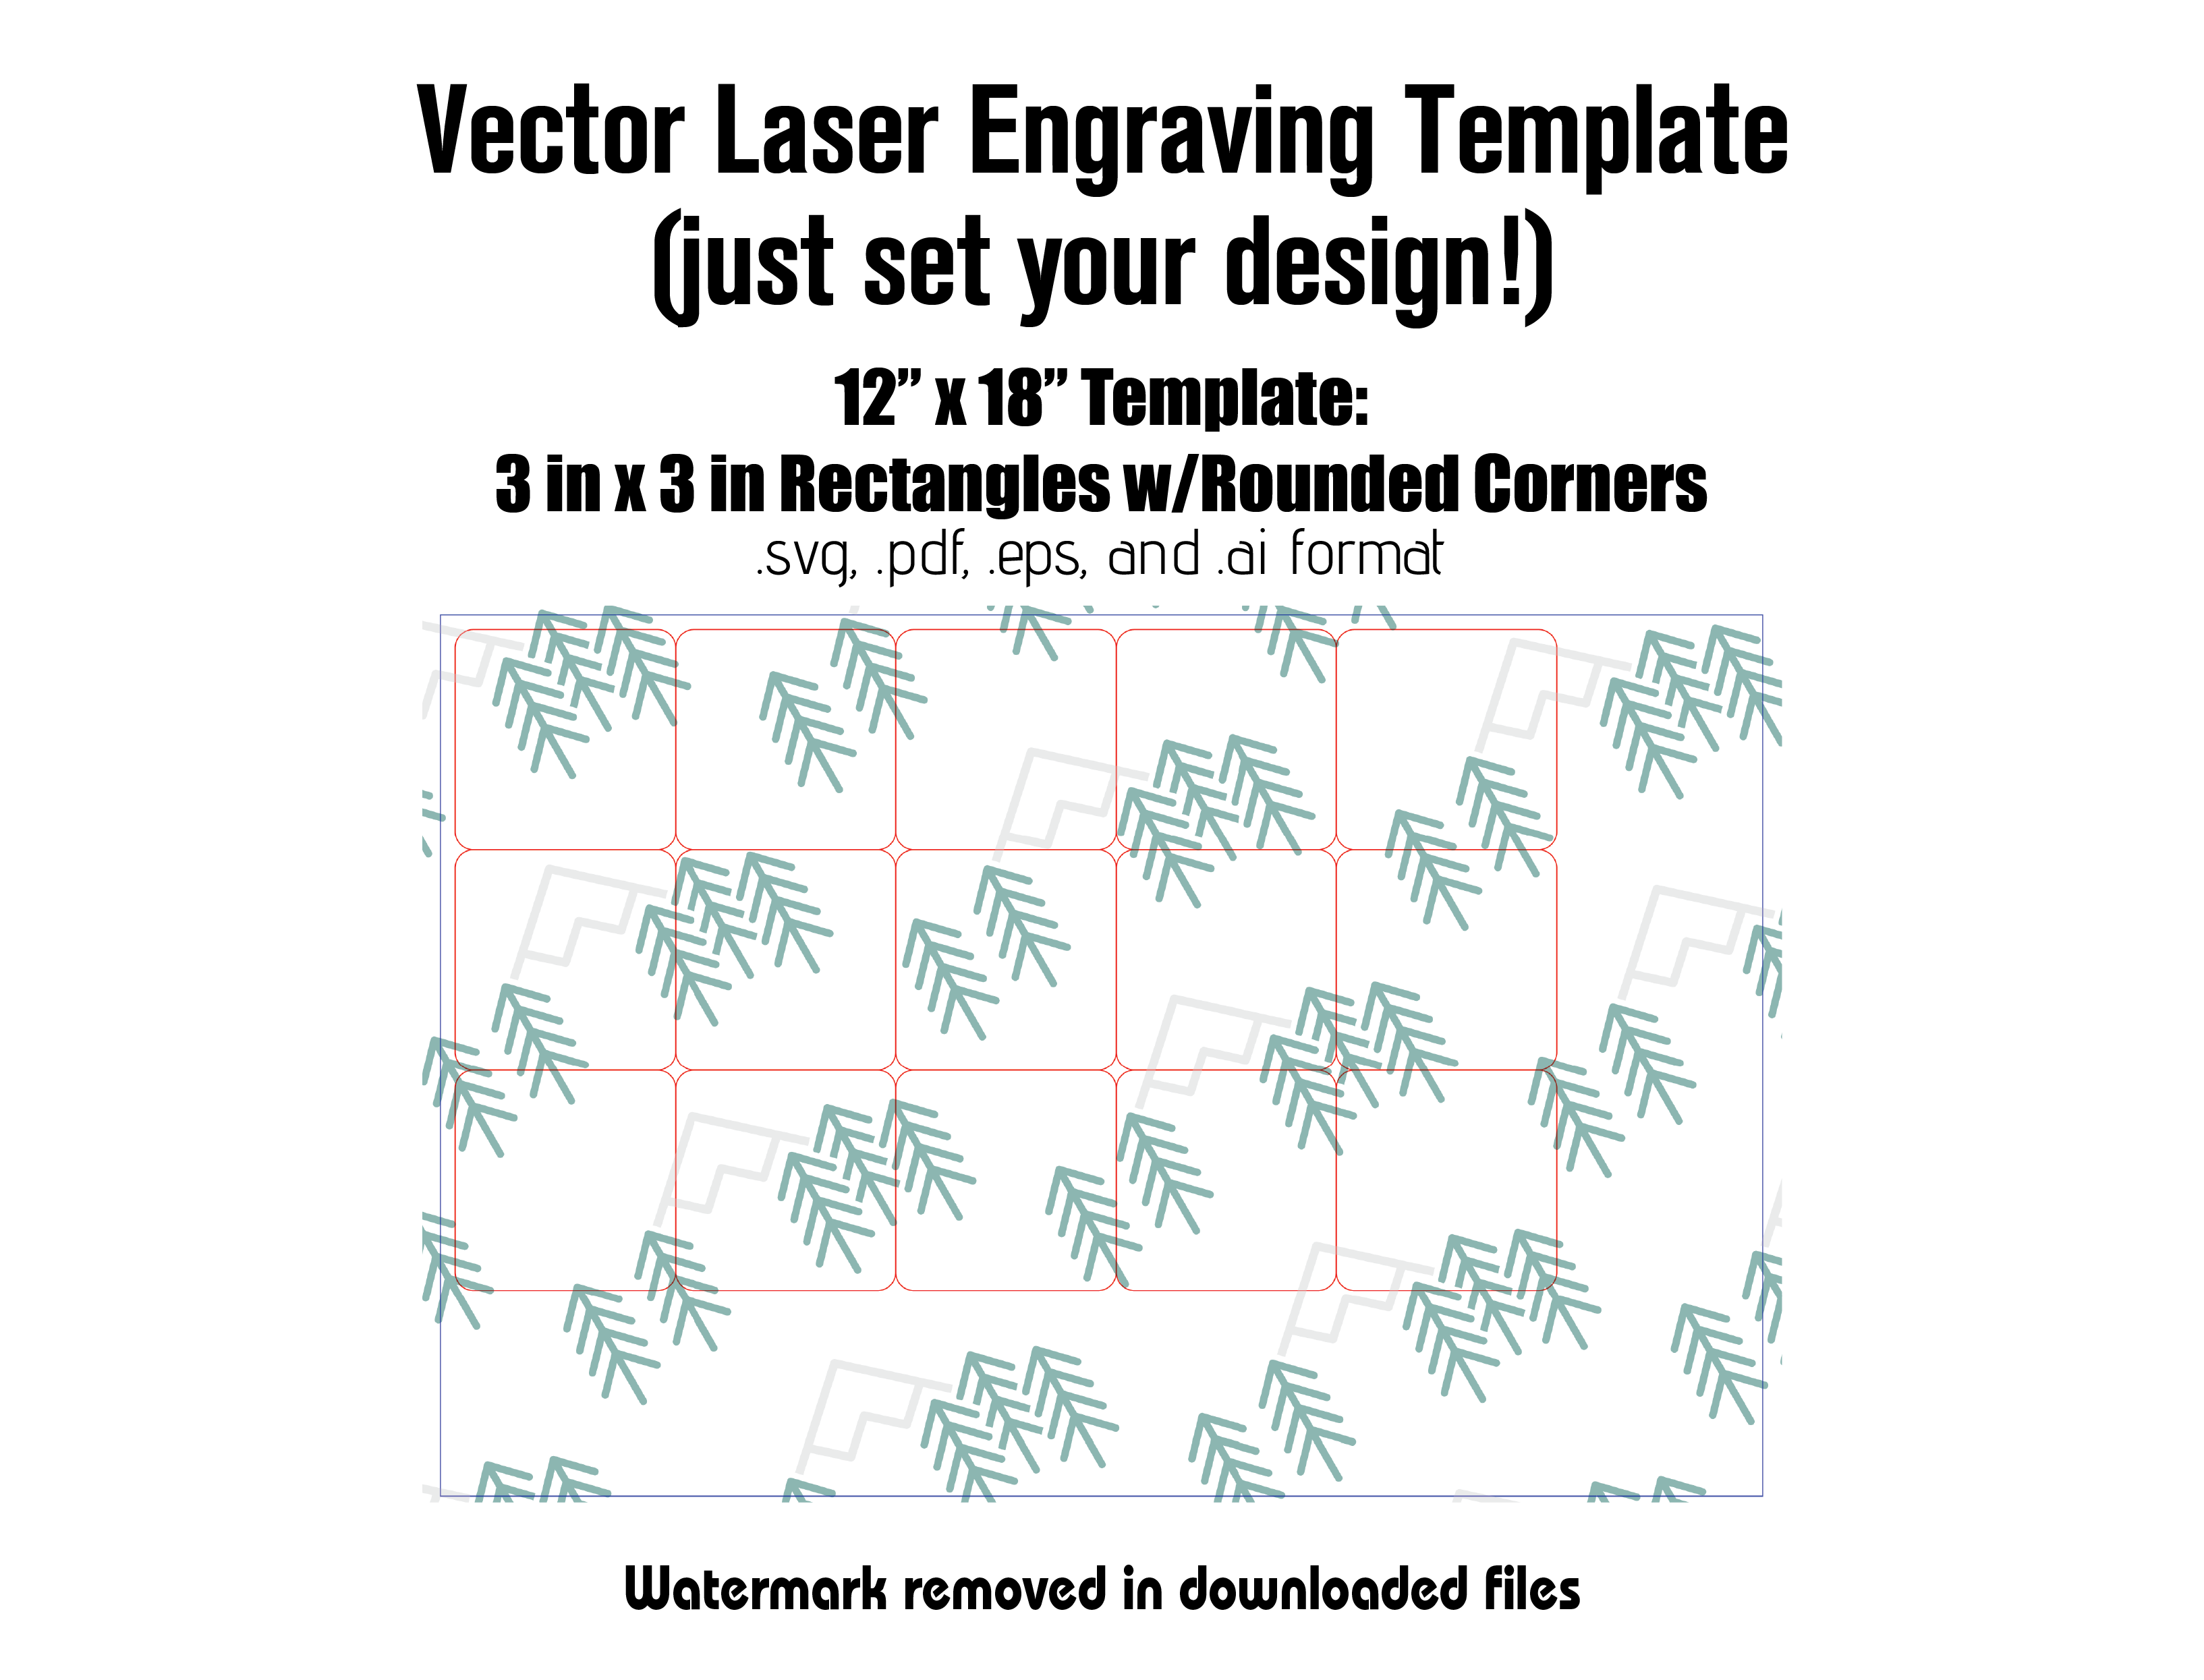 Digital Laser Cutting Template: 3" x 3" Rectangles w/Rounded Corners - 12" x 18" Sheet Size Digital Laser Engraving Files Craftworks NW 